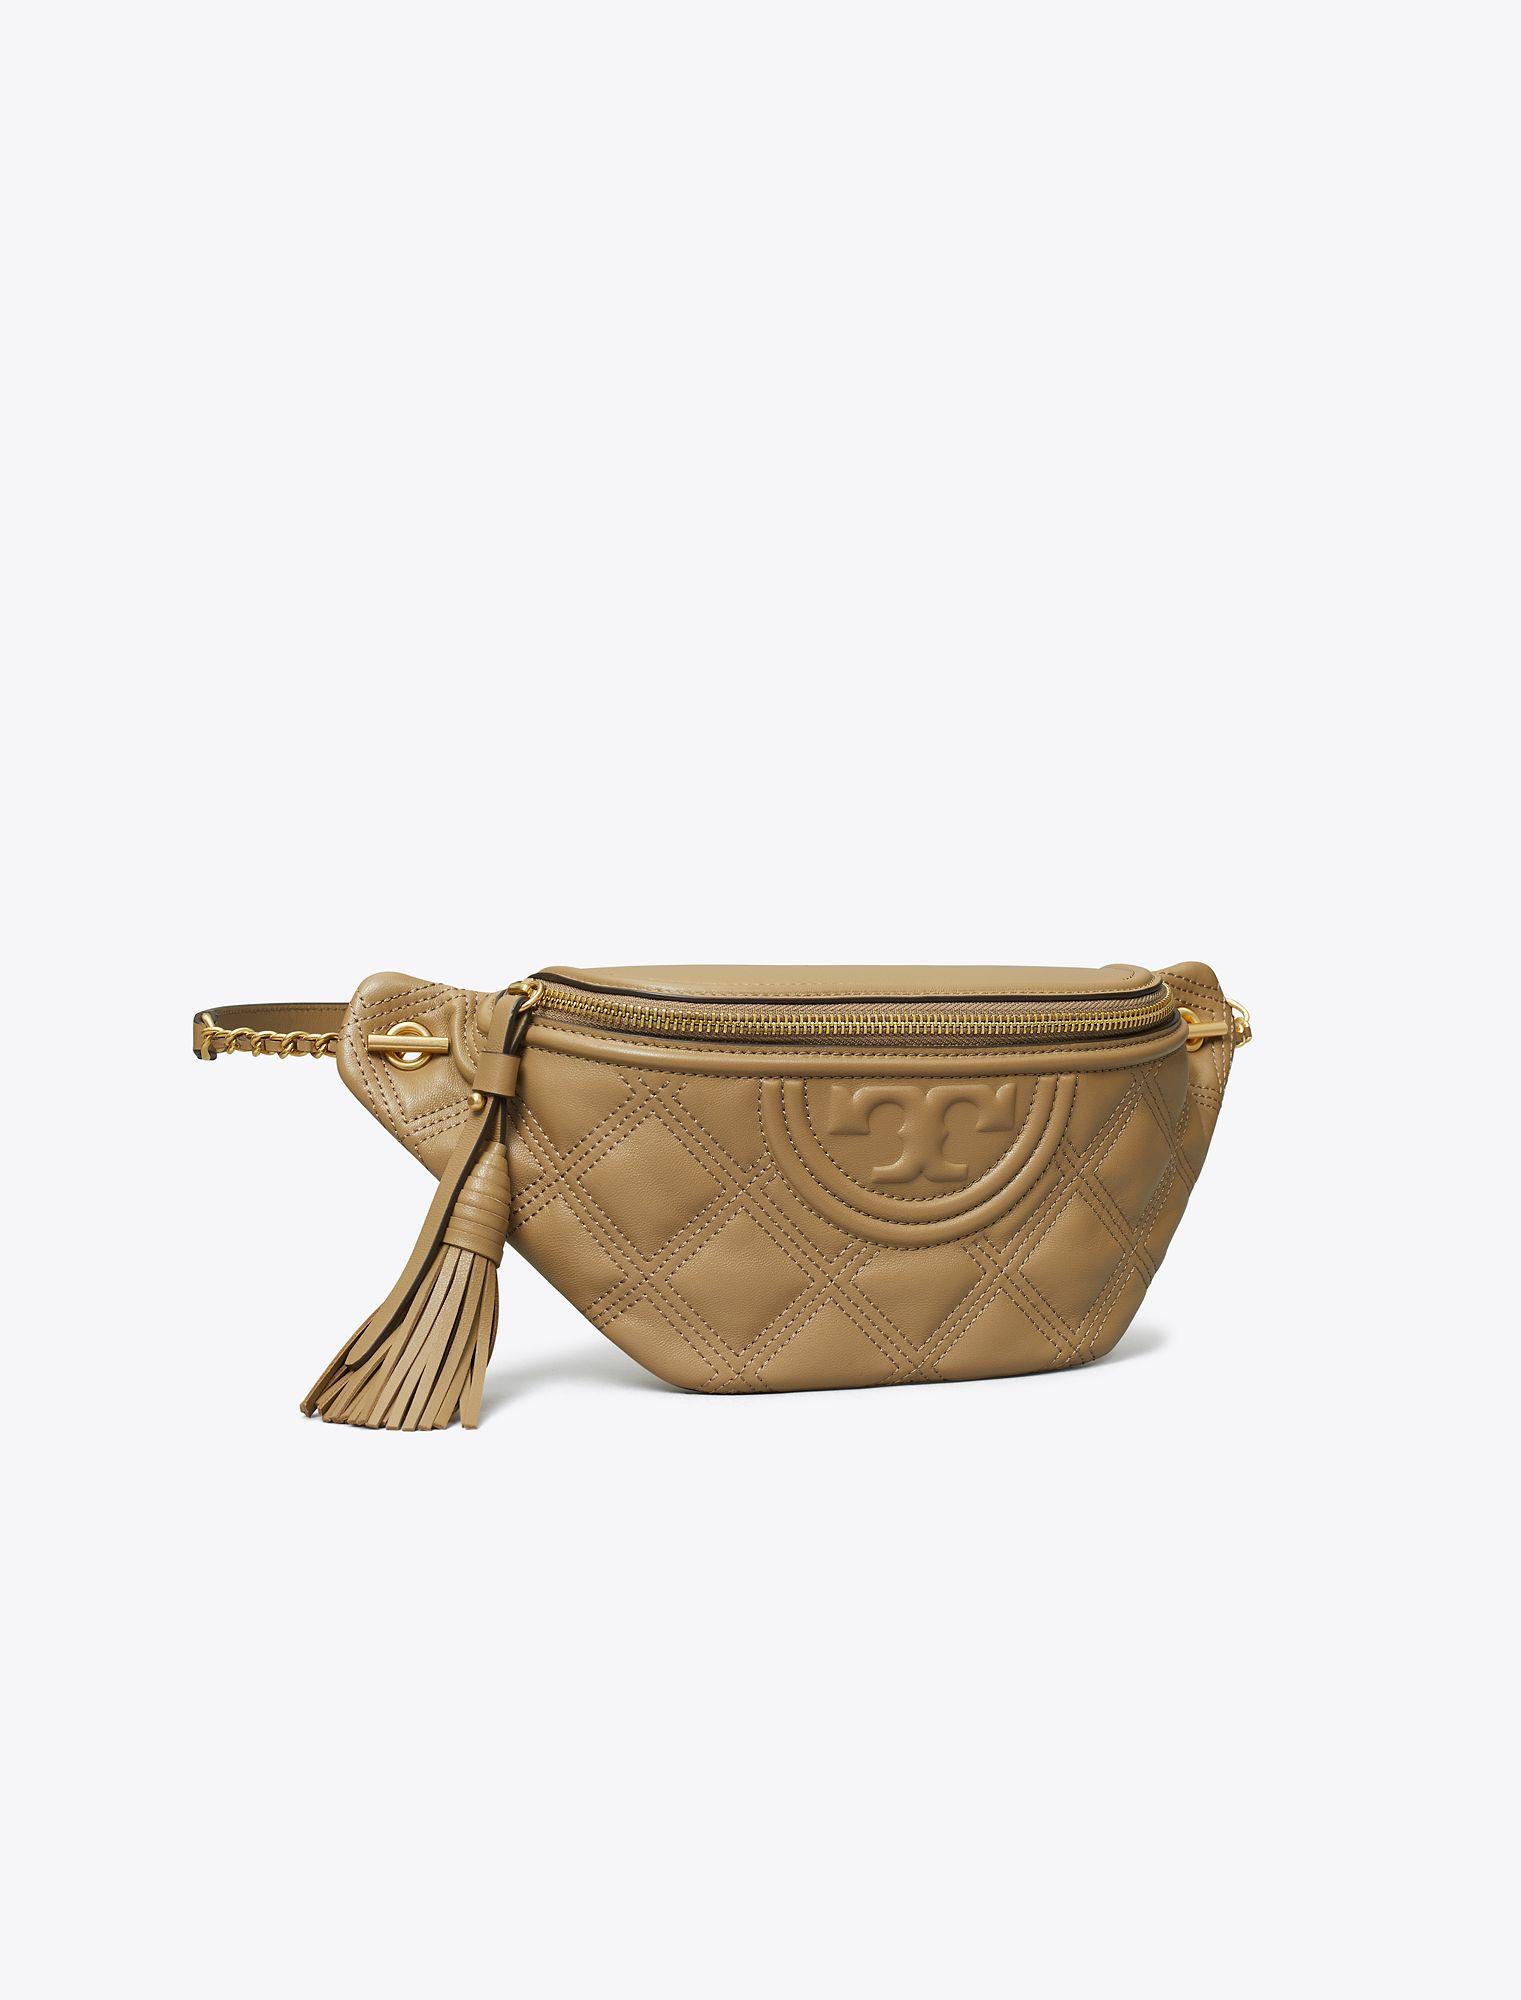 Fleming Tory Burch bag in quilted nappa